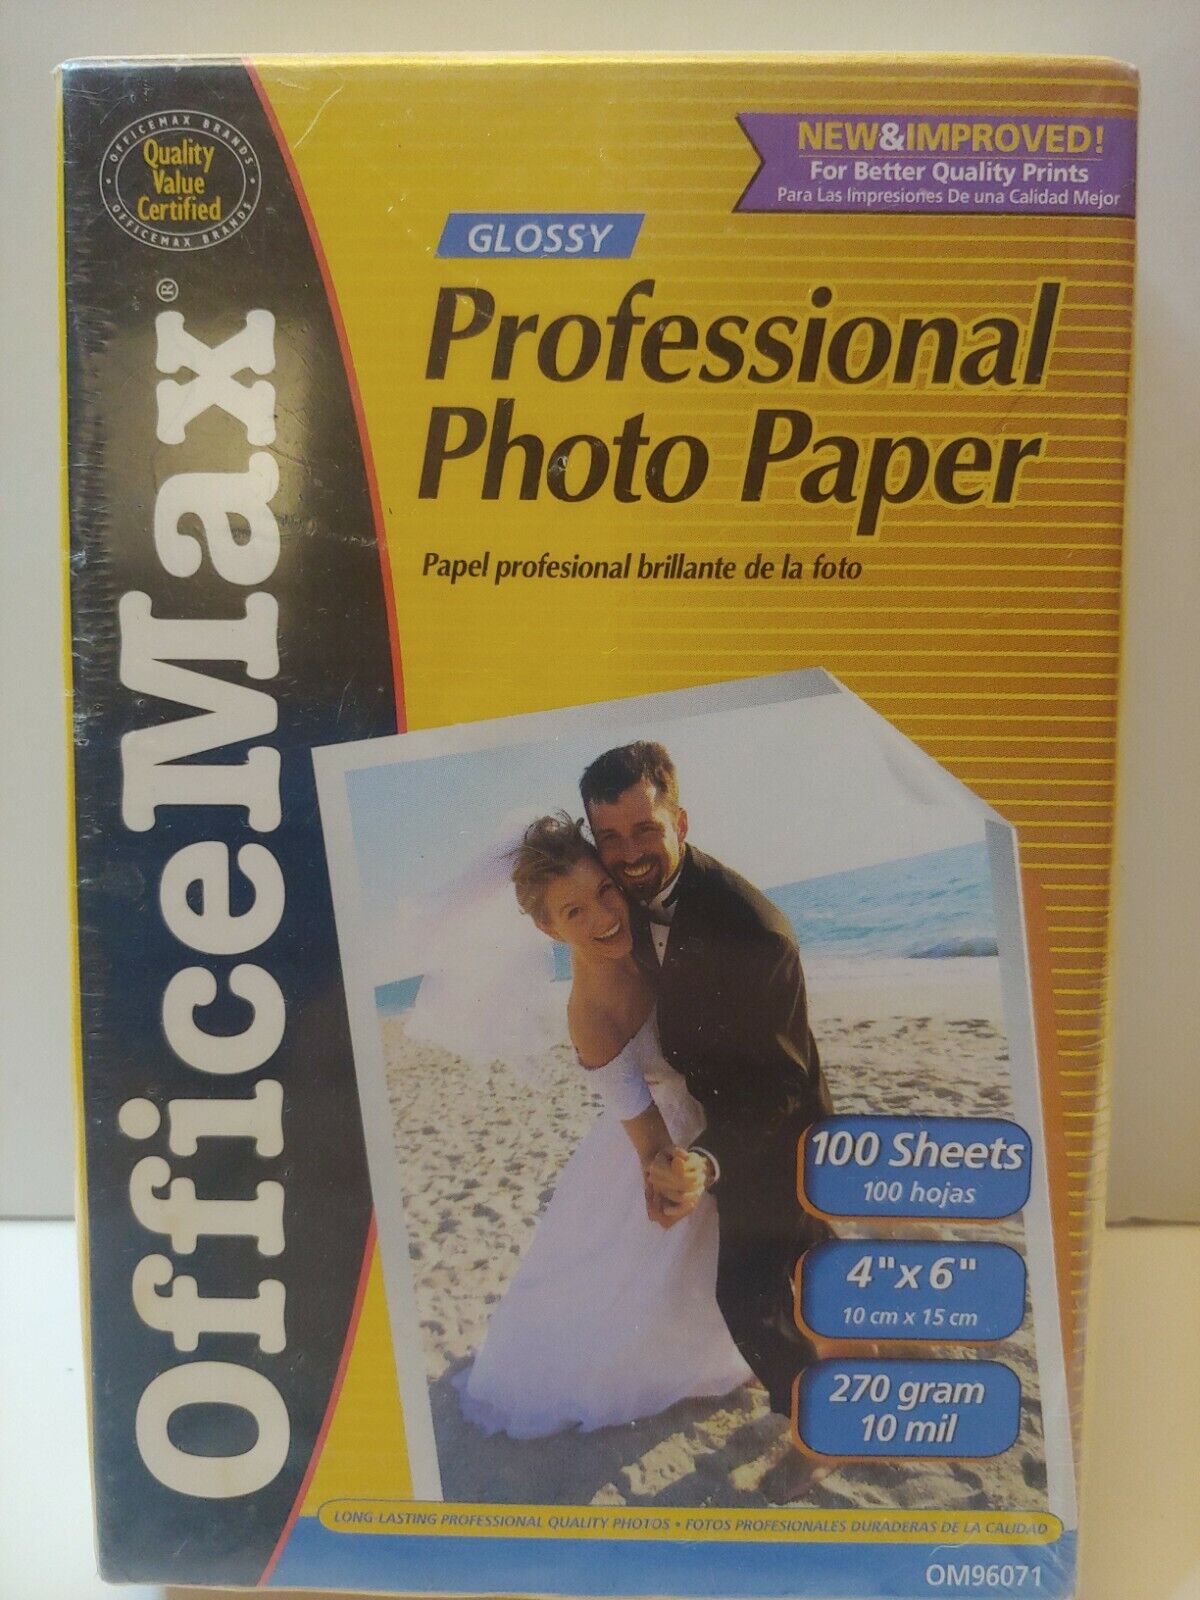 Office Max Professional Photo Paper 40 Sheets 4 x 6 Glossy New And Improved